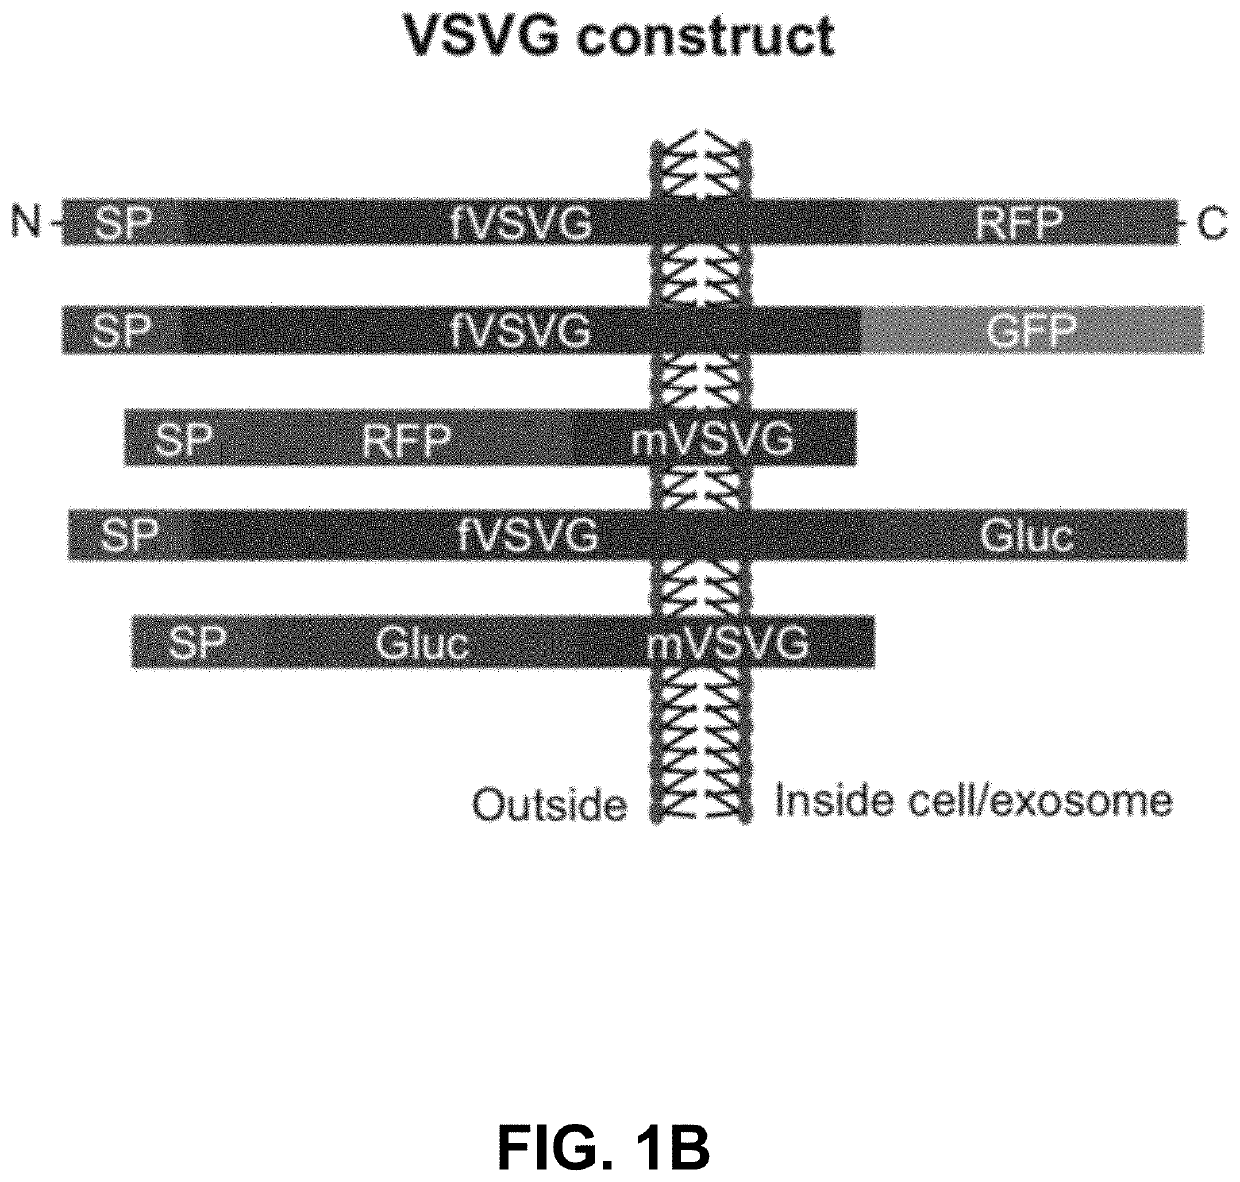 Engineered Exosomes for the Delivery of Bioactive Cargo Using Transmembrane VSV-G